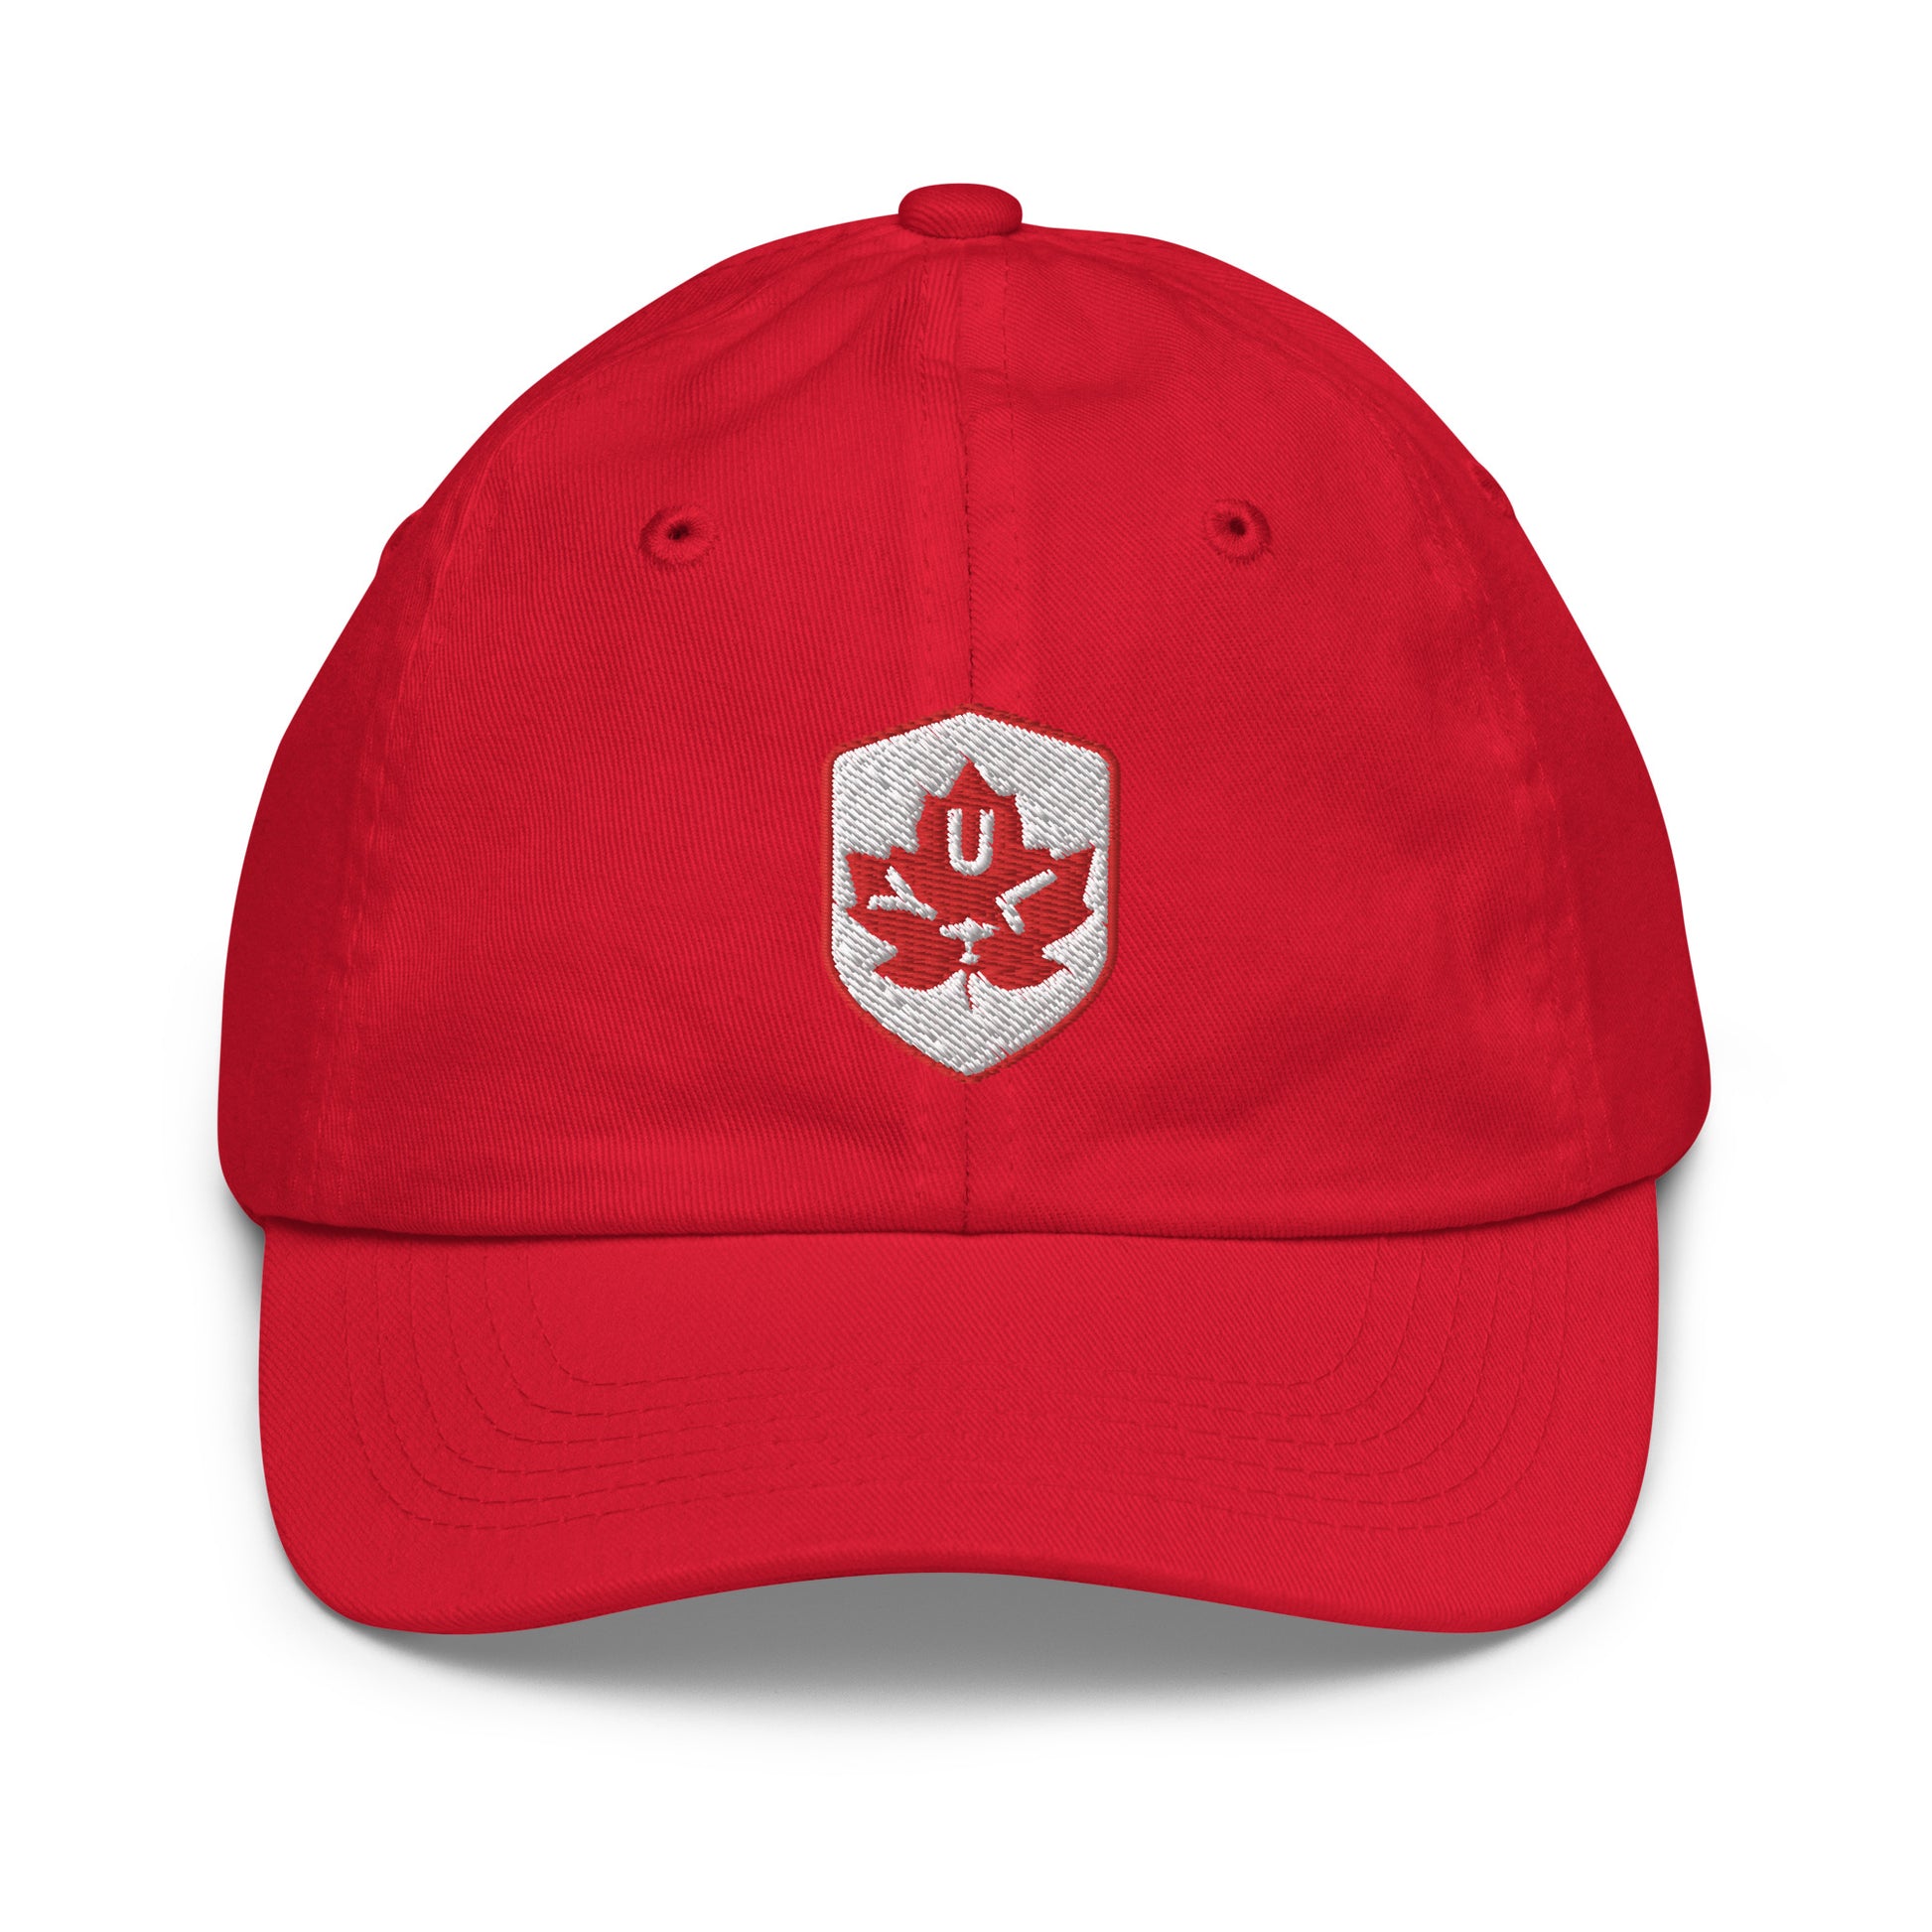 Maple Leaf Kid's Cap - Red/White • YUL Montreal • YHM Designs - Image 16